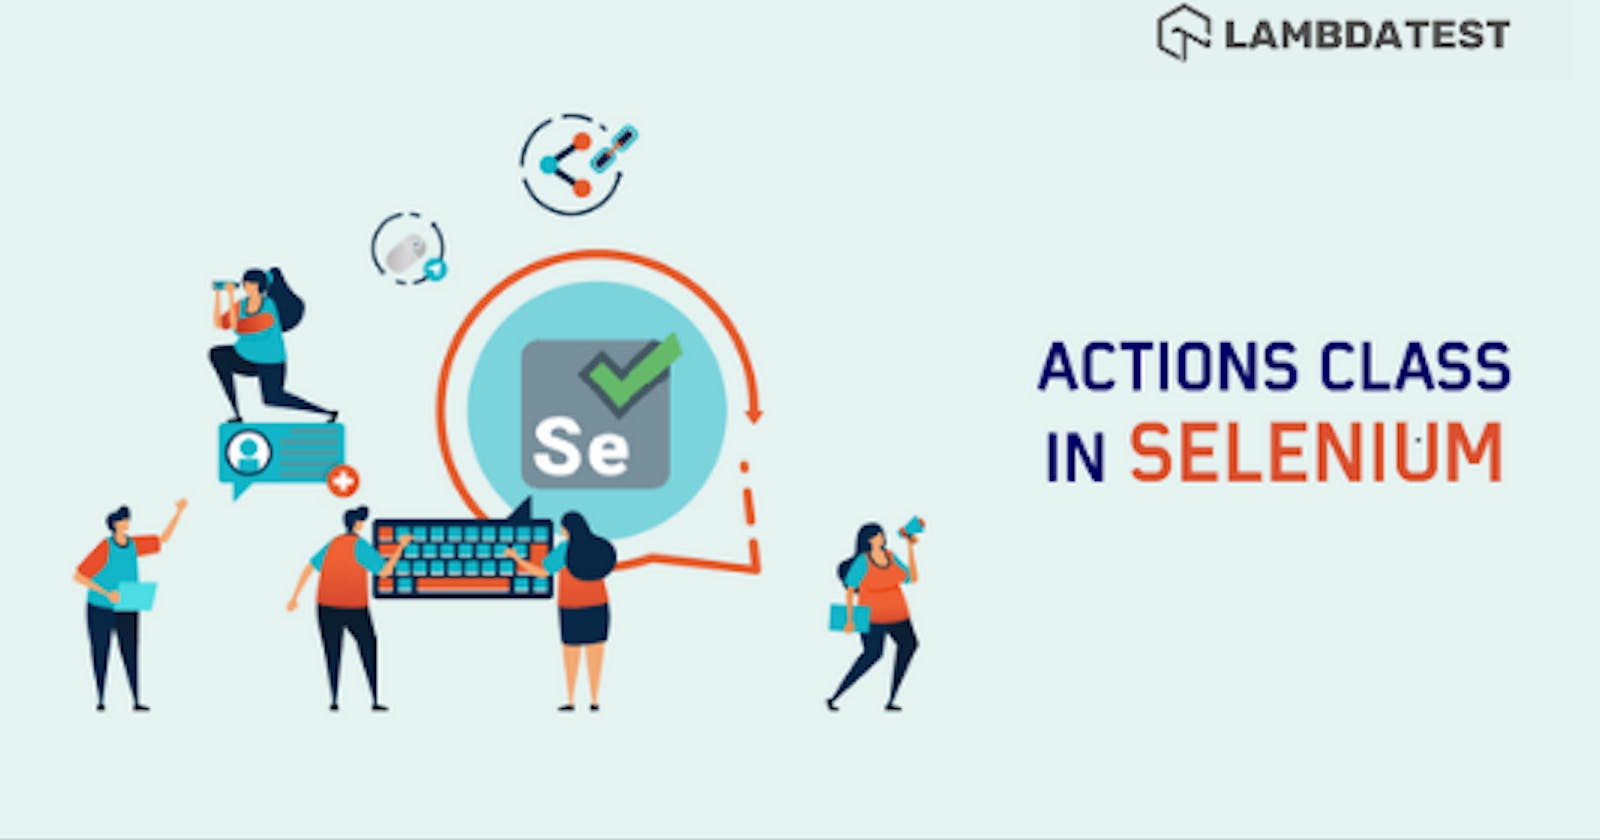 Actions Class In Selenium: What Is It & How To Use It?